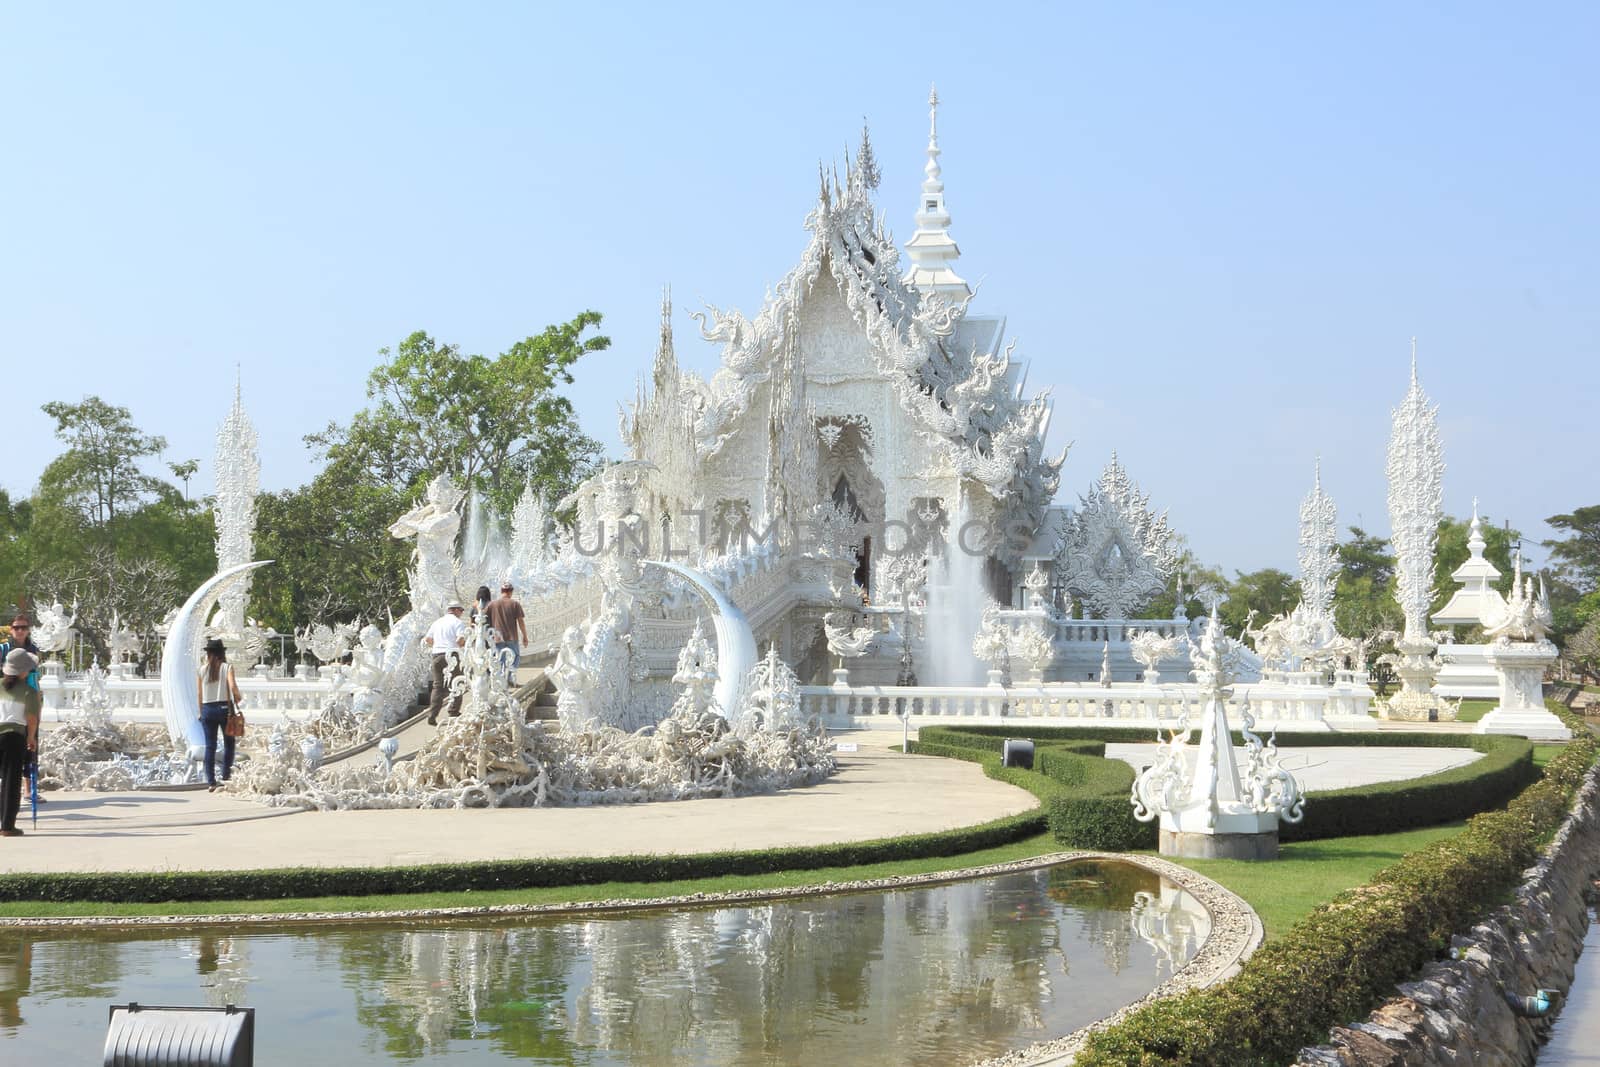 CHIANG RAI, THAILAND - JANUARY 10: Wat Rong Koon Temple on January 10, 2013 in Chiang Rai province, Northern Thailand, Wat Rong Koon Temple is a modern temple built since 1998 by Thai artist Chalermchai Kositpipat.